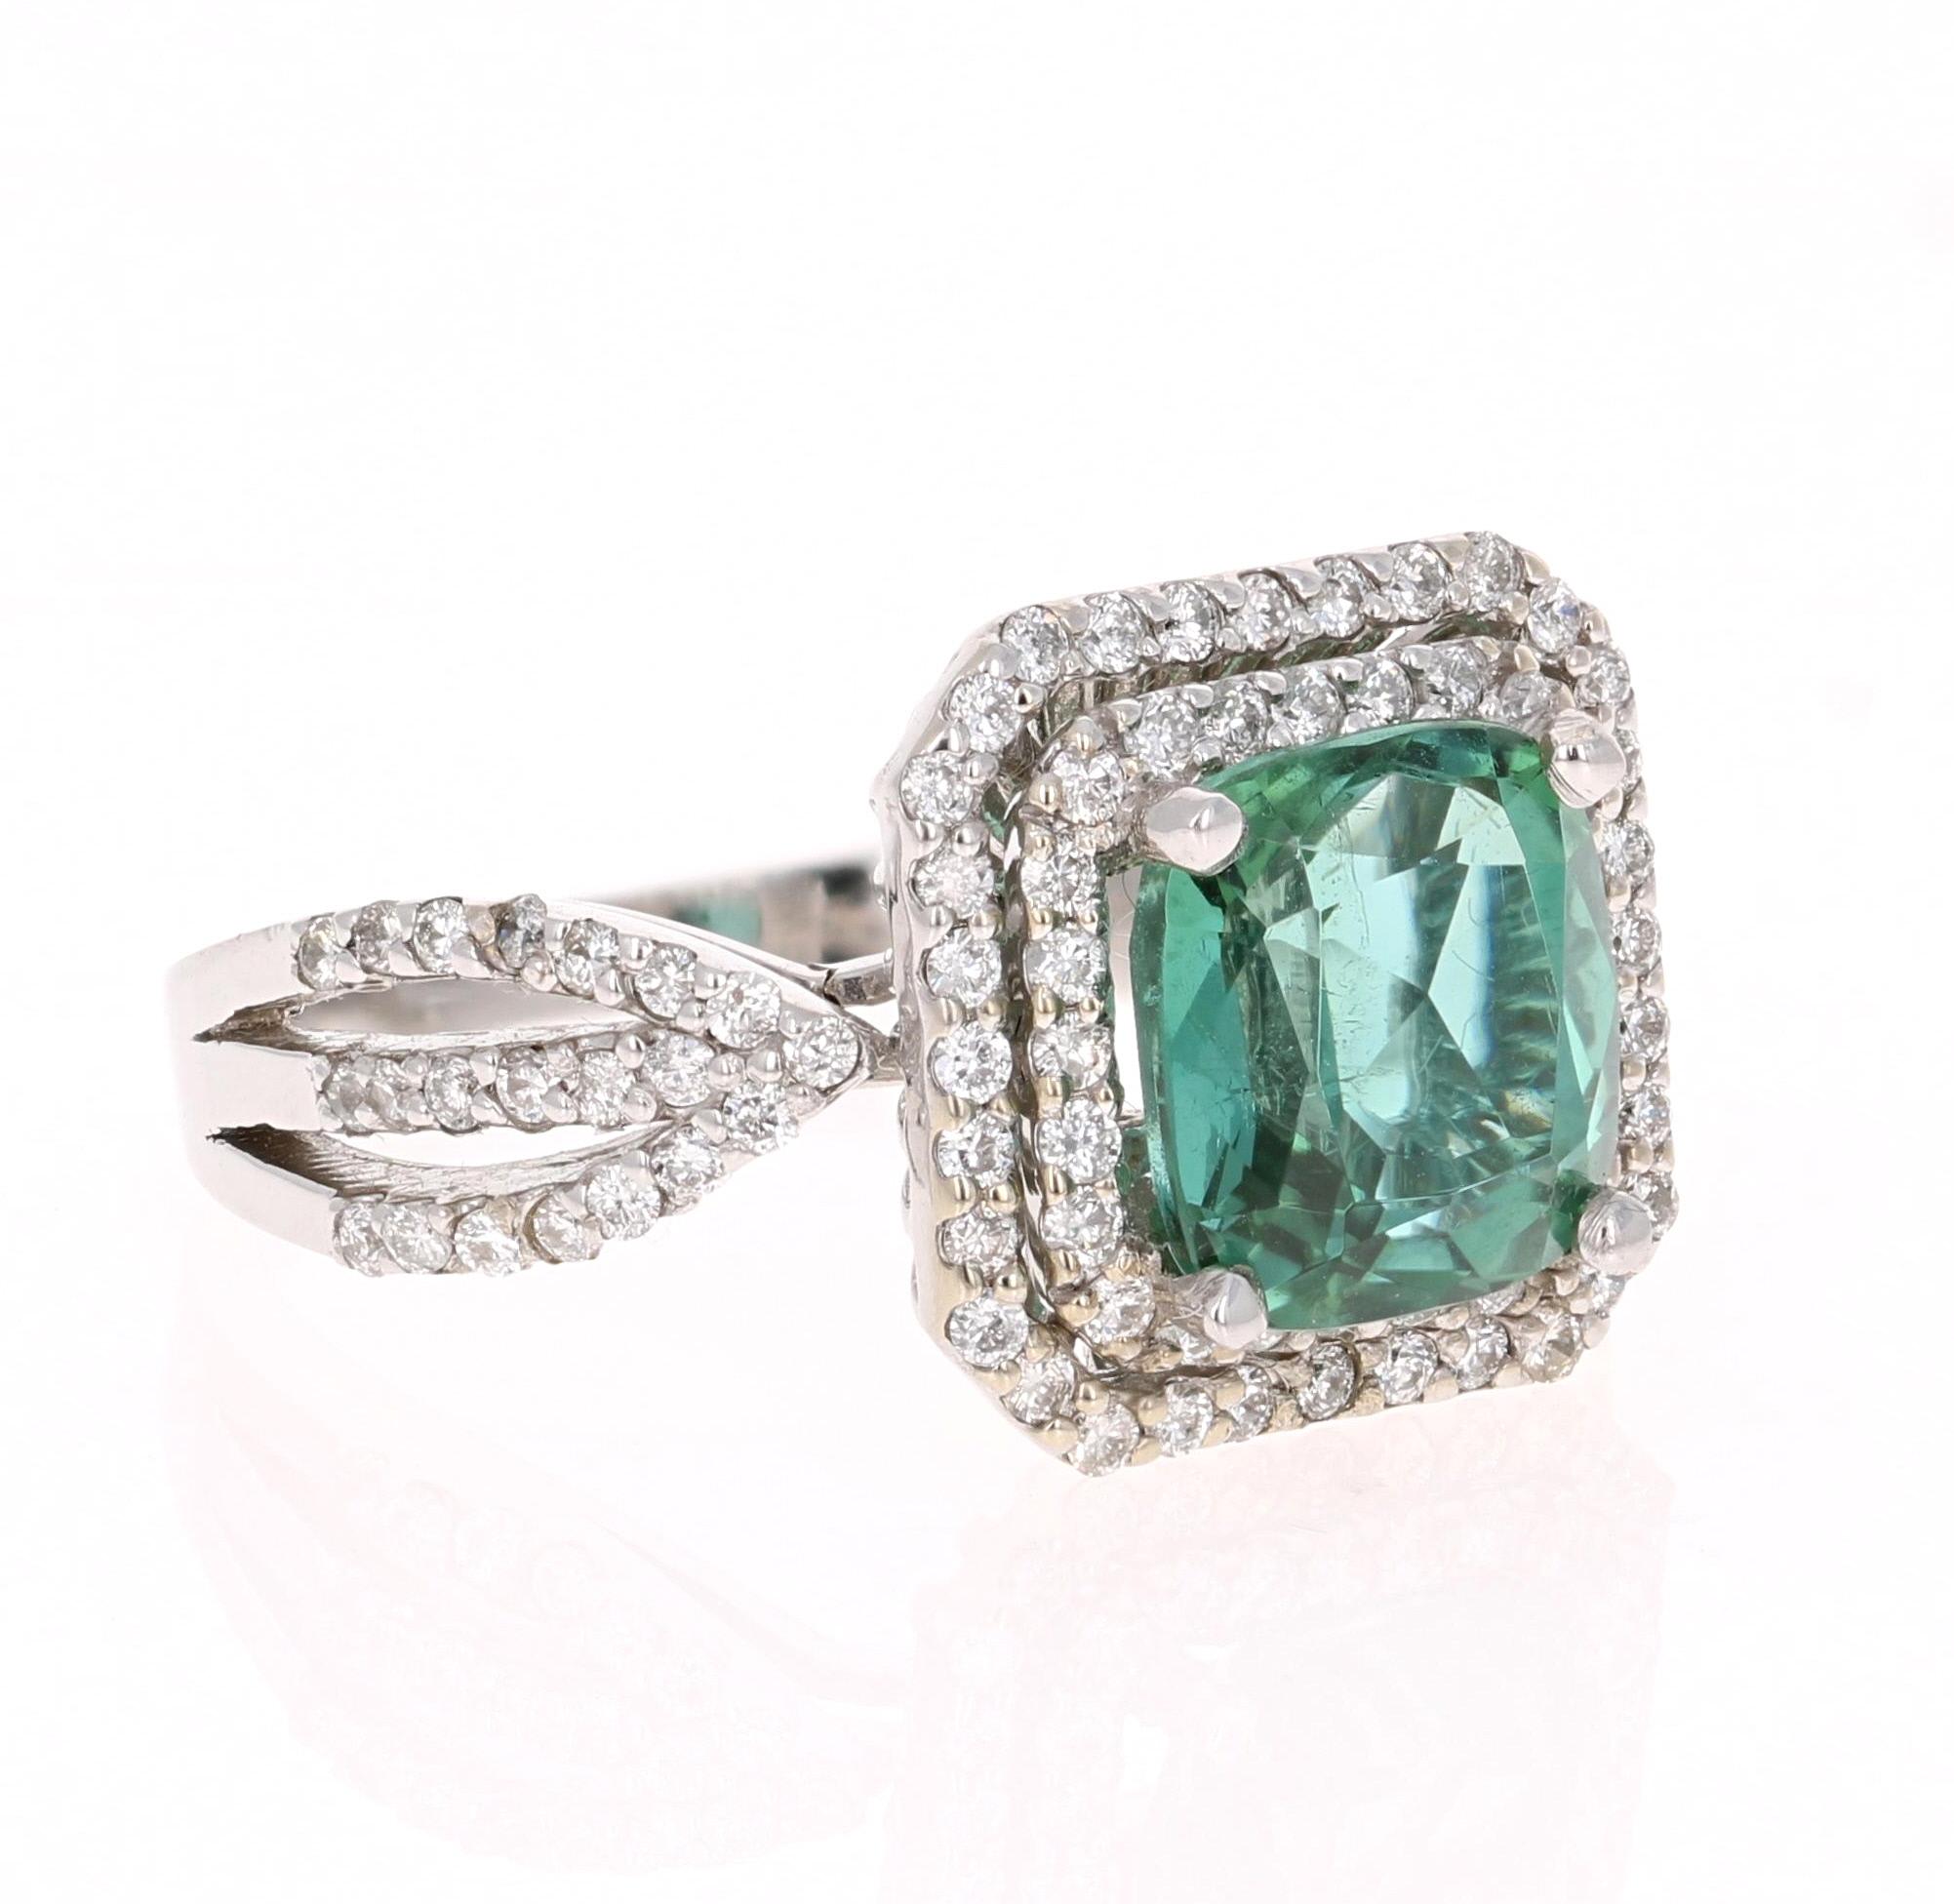 Beautifully designed Green Tourmaline Ring! The beautiful halo setting gives the ring an elegant flow which makes the Green of the Tourmaline stand out brilliantly. 

This ring has a 2.99 carat Cushion Cut Green Tourmaline and has 98 Round Cut